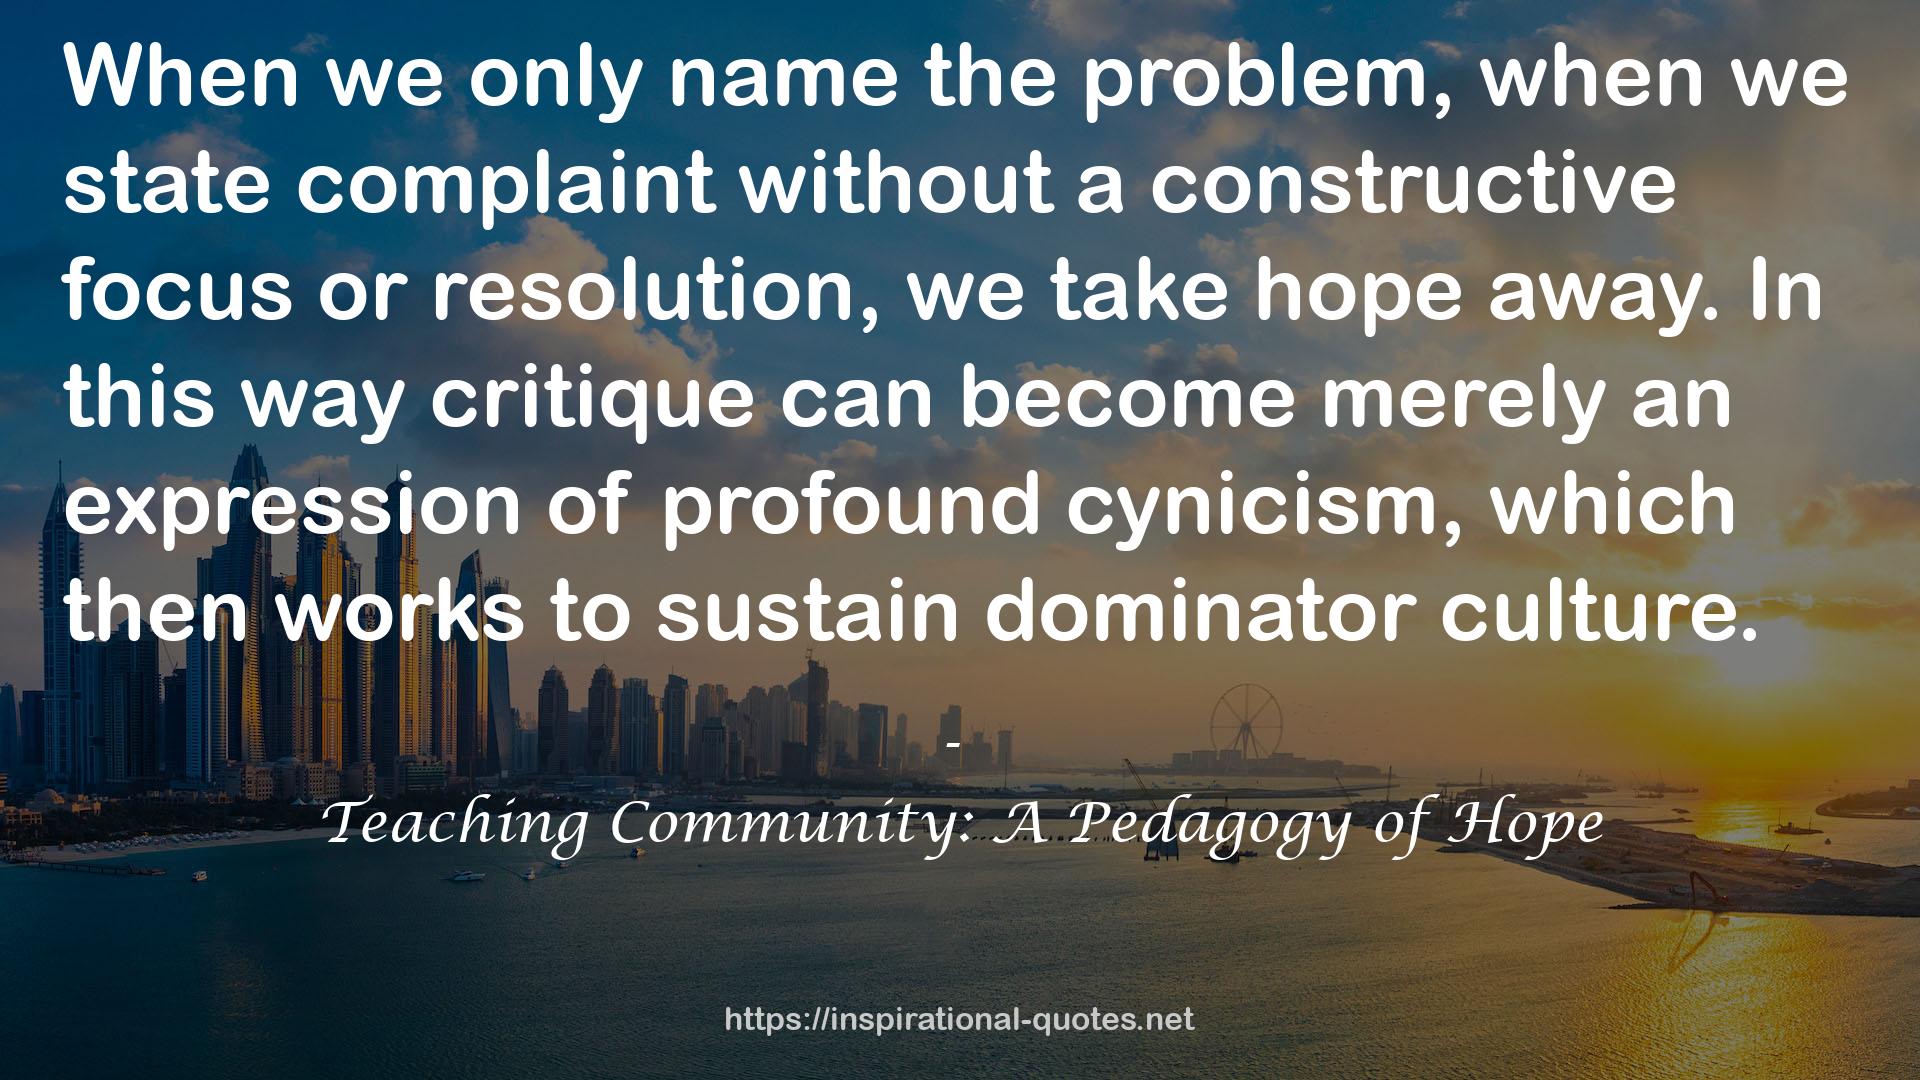 Teaching Community: A Pedagogy of Hope QUOTES